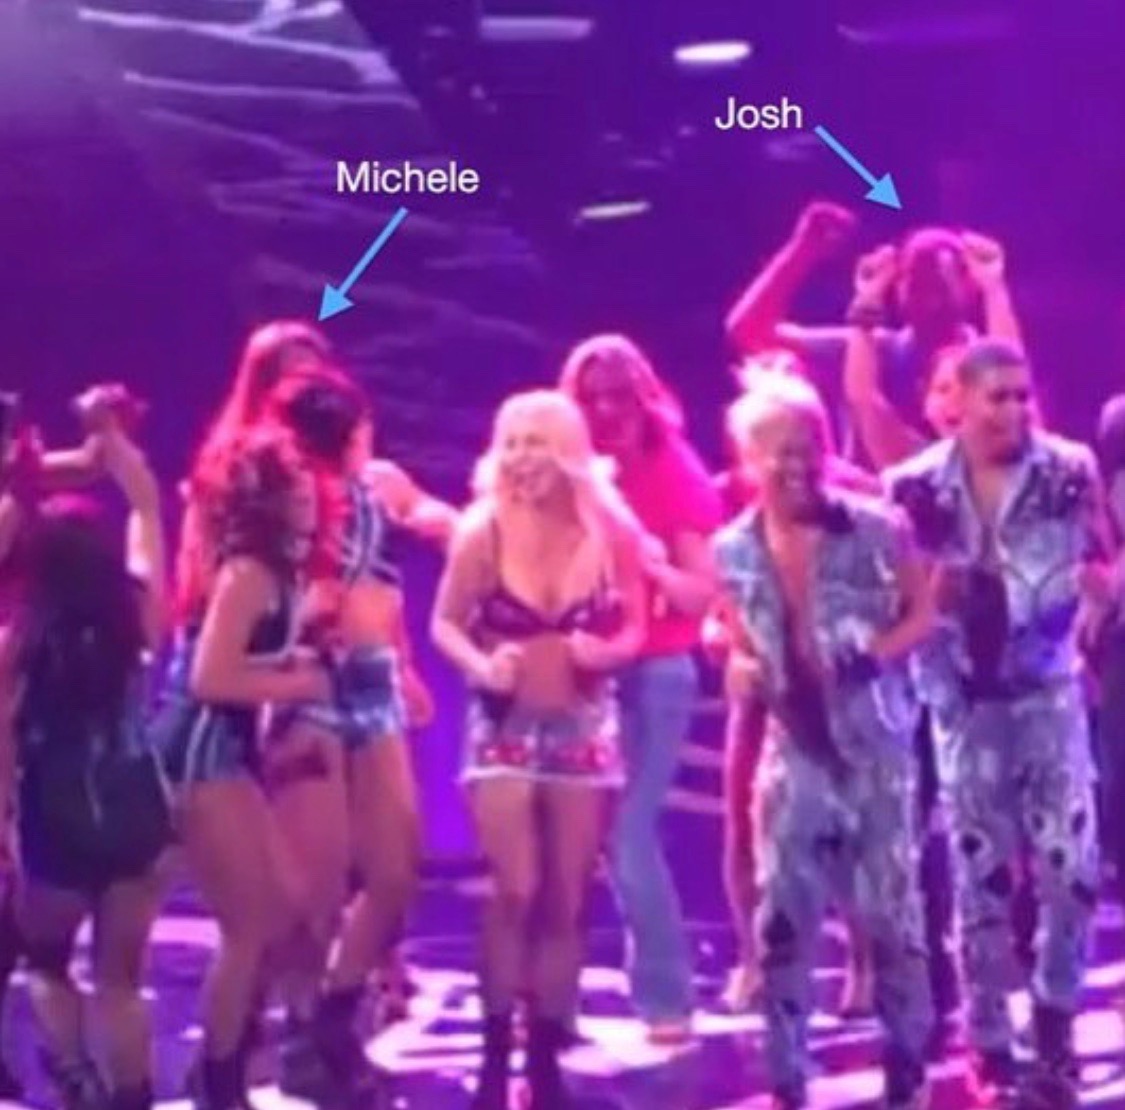 Dancing on the stage with Britney Spears